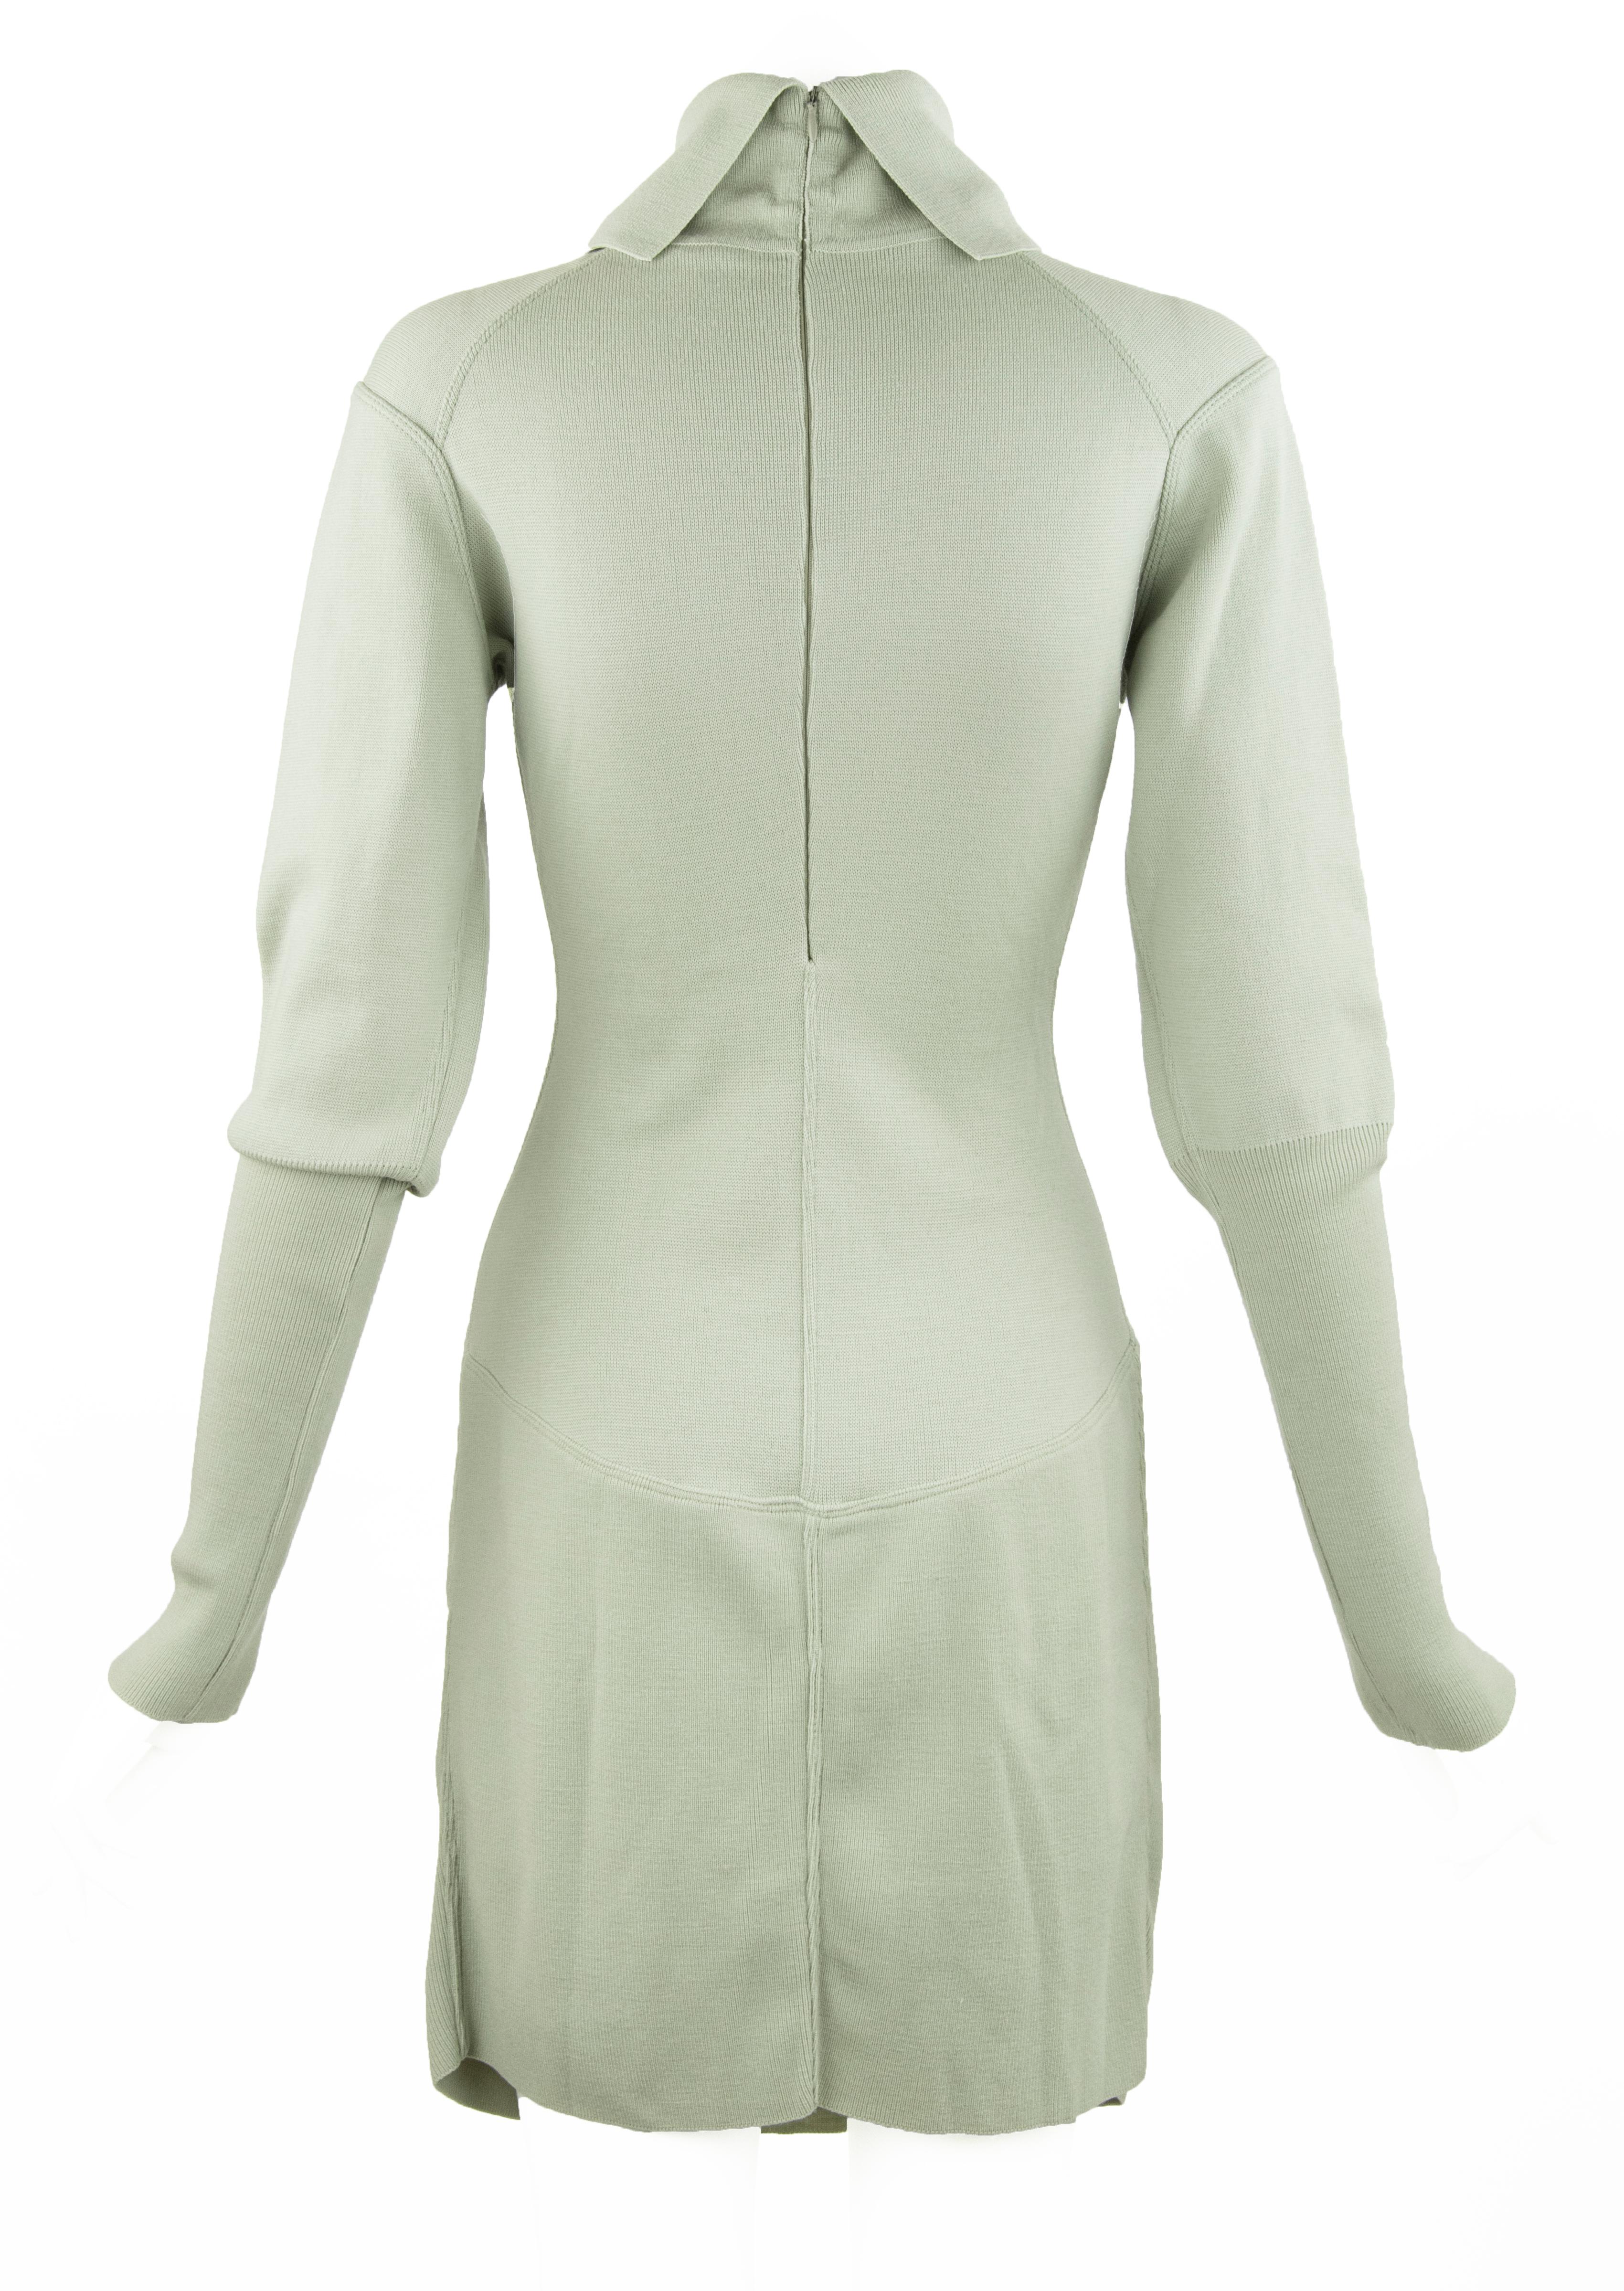 Beautiful light green knit vintage dress with cowl turtleneck and long sleeves.  Very chic look which can by styles and worn from the office to dinner.  

Size: S

Condition: Pristine vintage condition

Composition: 100% wool

Care: Dry clean